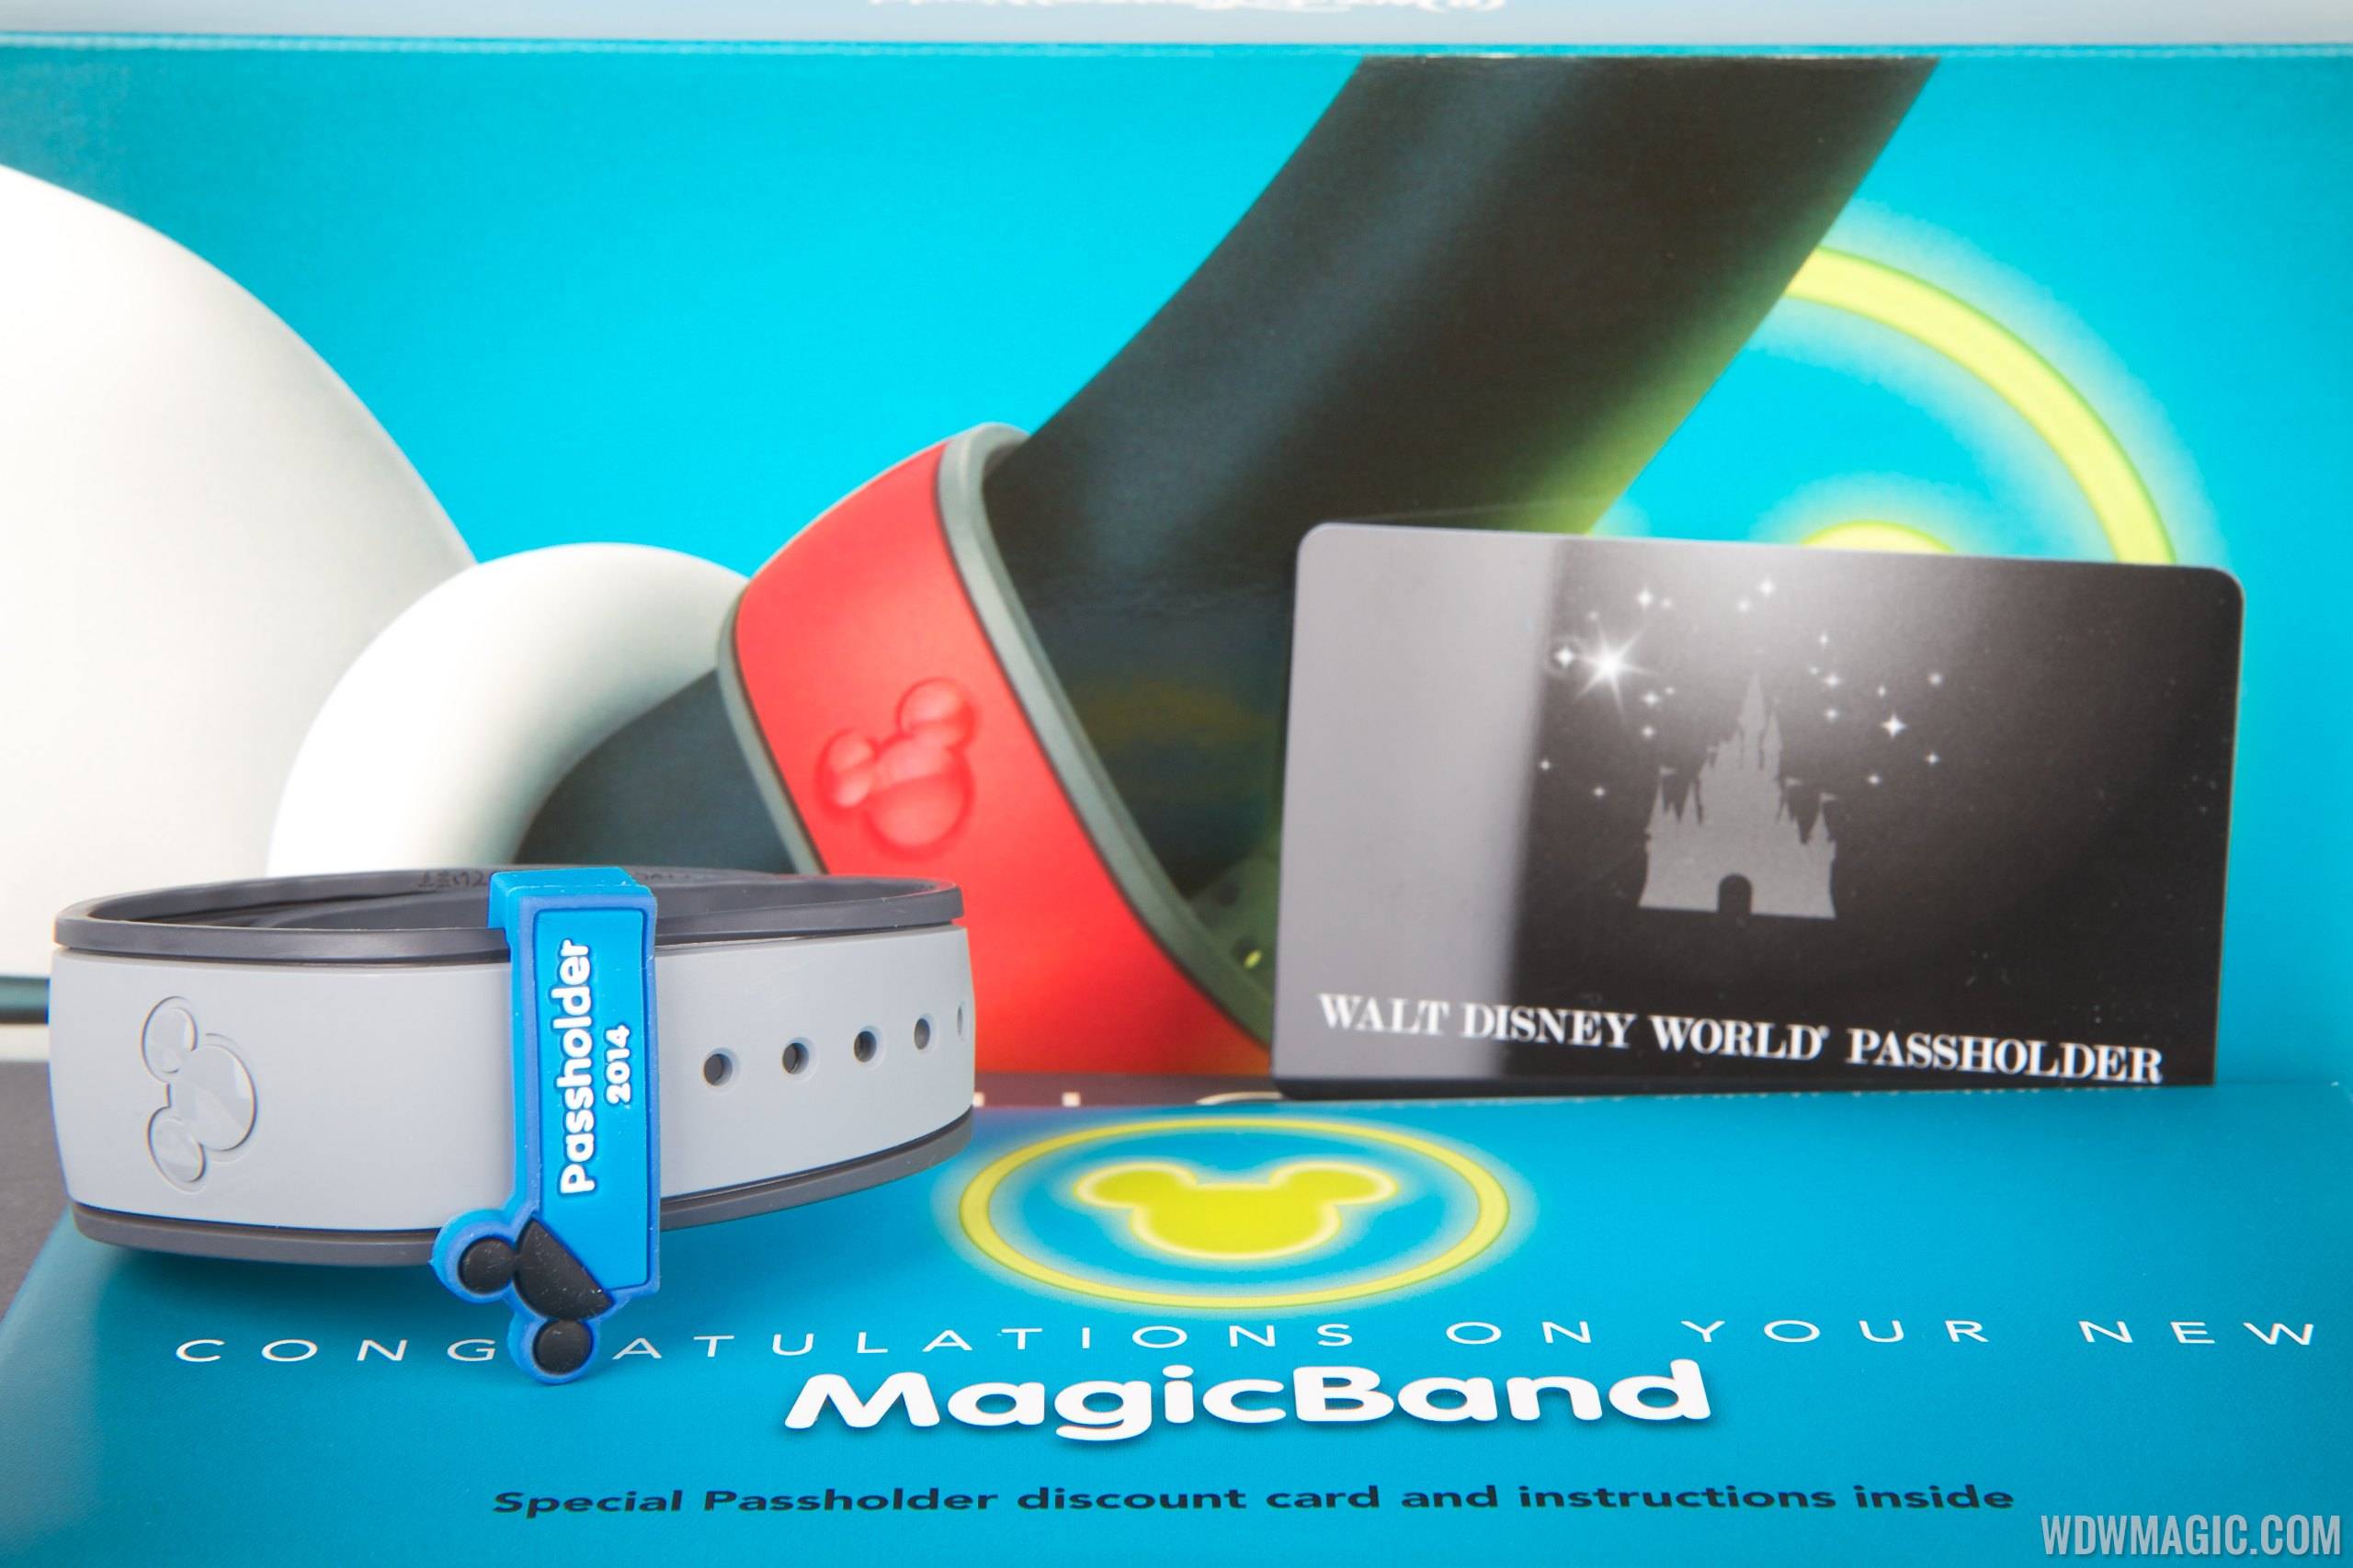 MagicBand passholder contents